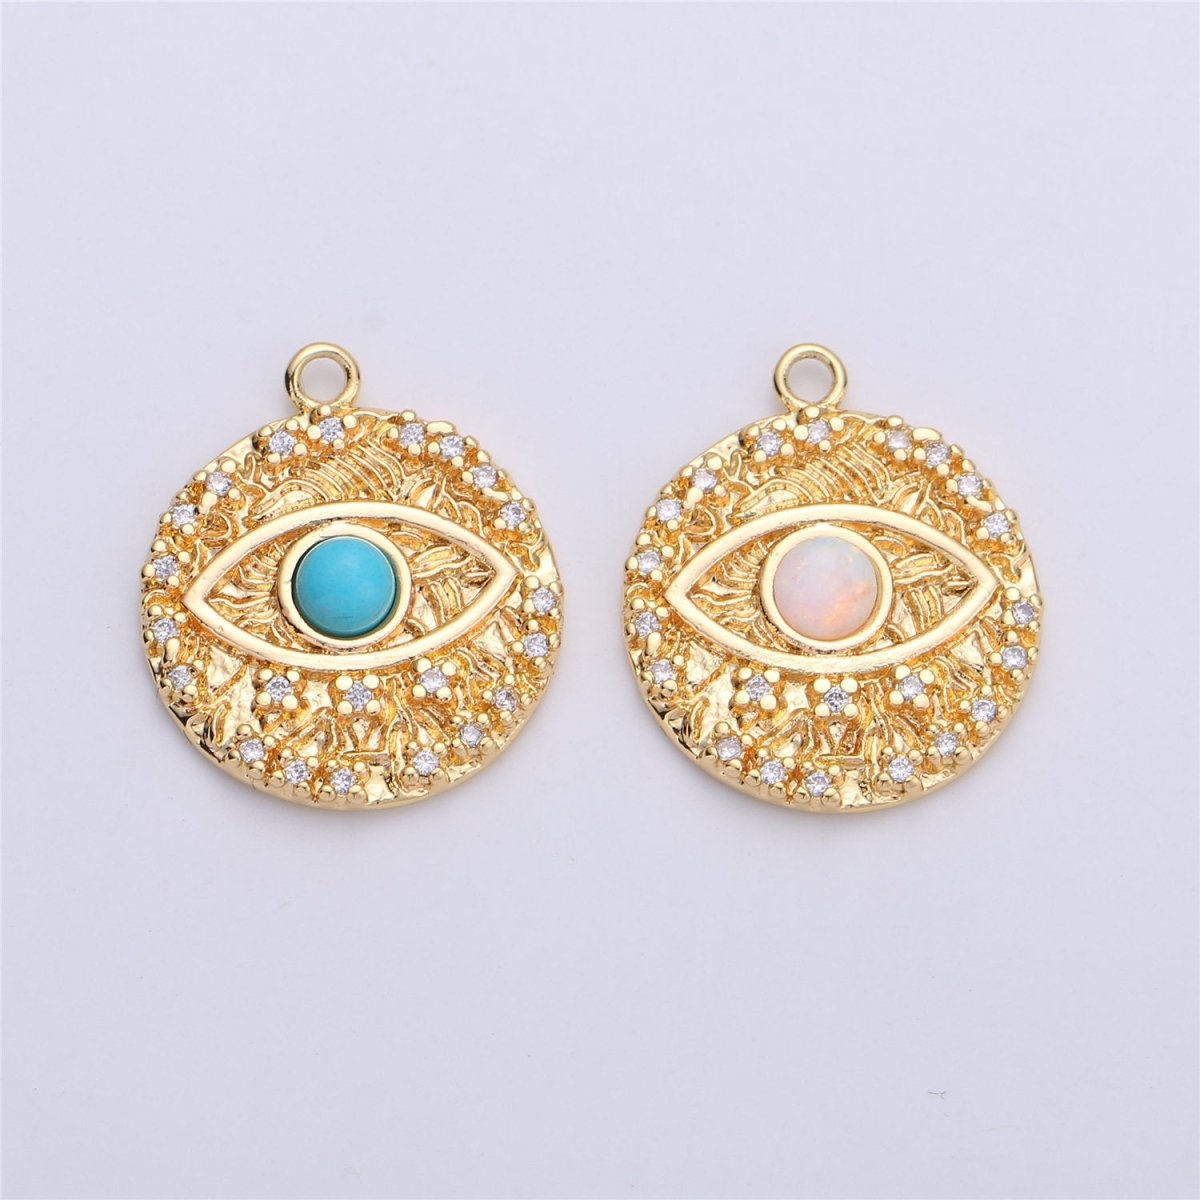 Opal Evil Eye Charm / Turquoise Evil Eye charm in Gold Filled for Necklace Bracelet Earring Charm for Jewelry Making Supply C-645,C-646 (OPAL) - DLUXCA